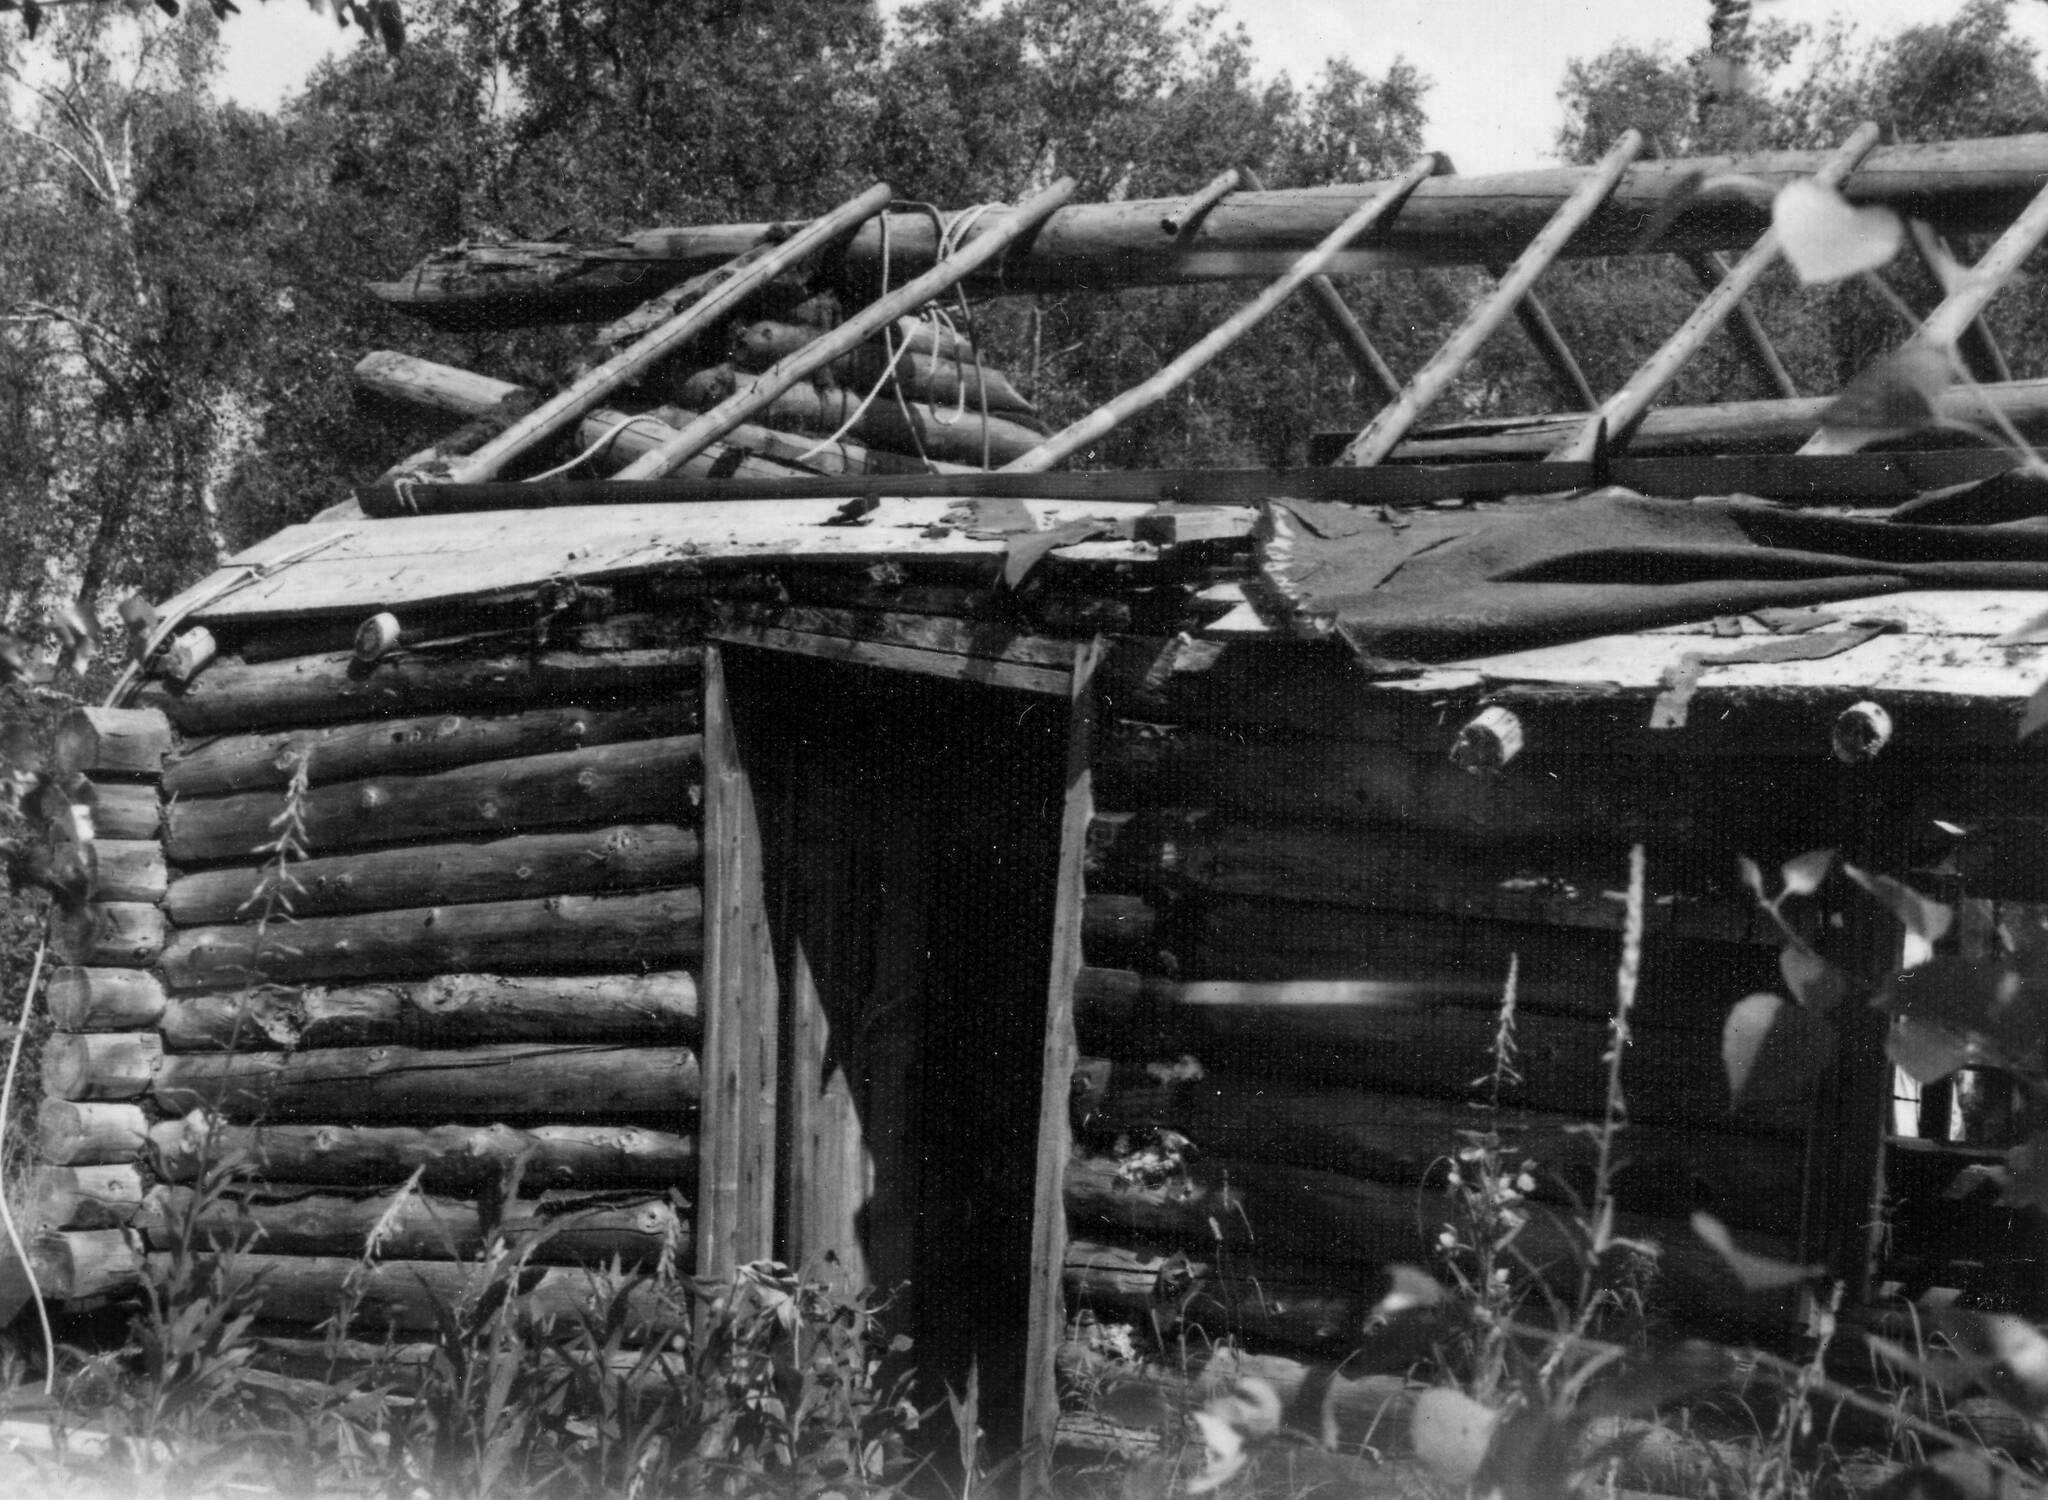 Photo courtesy of the Lancashire Family Collection
After the Lancashire family moved out of their original homestead cabin and into a new frame home, the old structure began to deteriorate. Eventually, the family destroyed the old cabin.